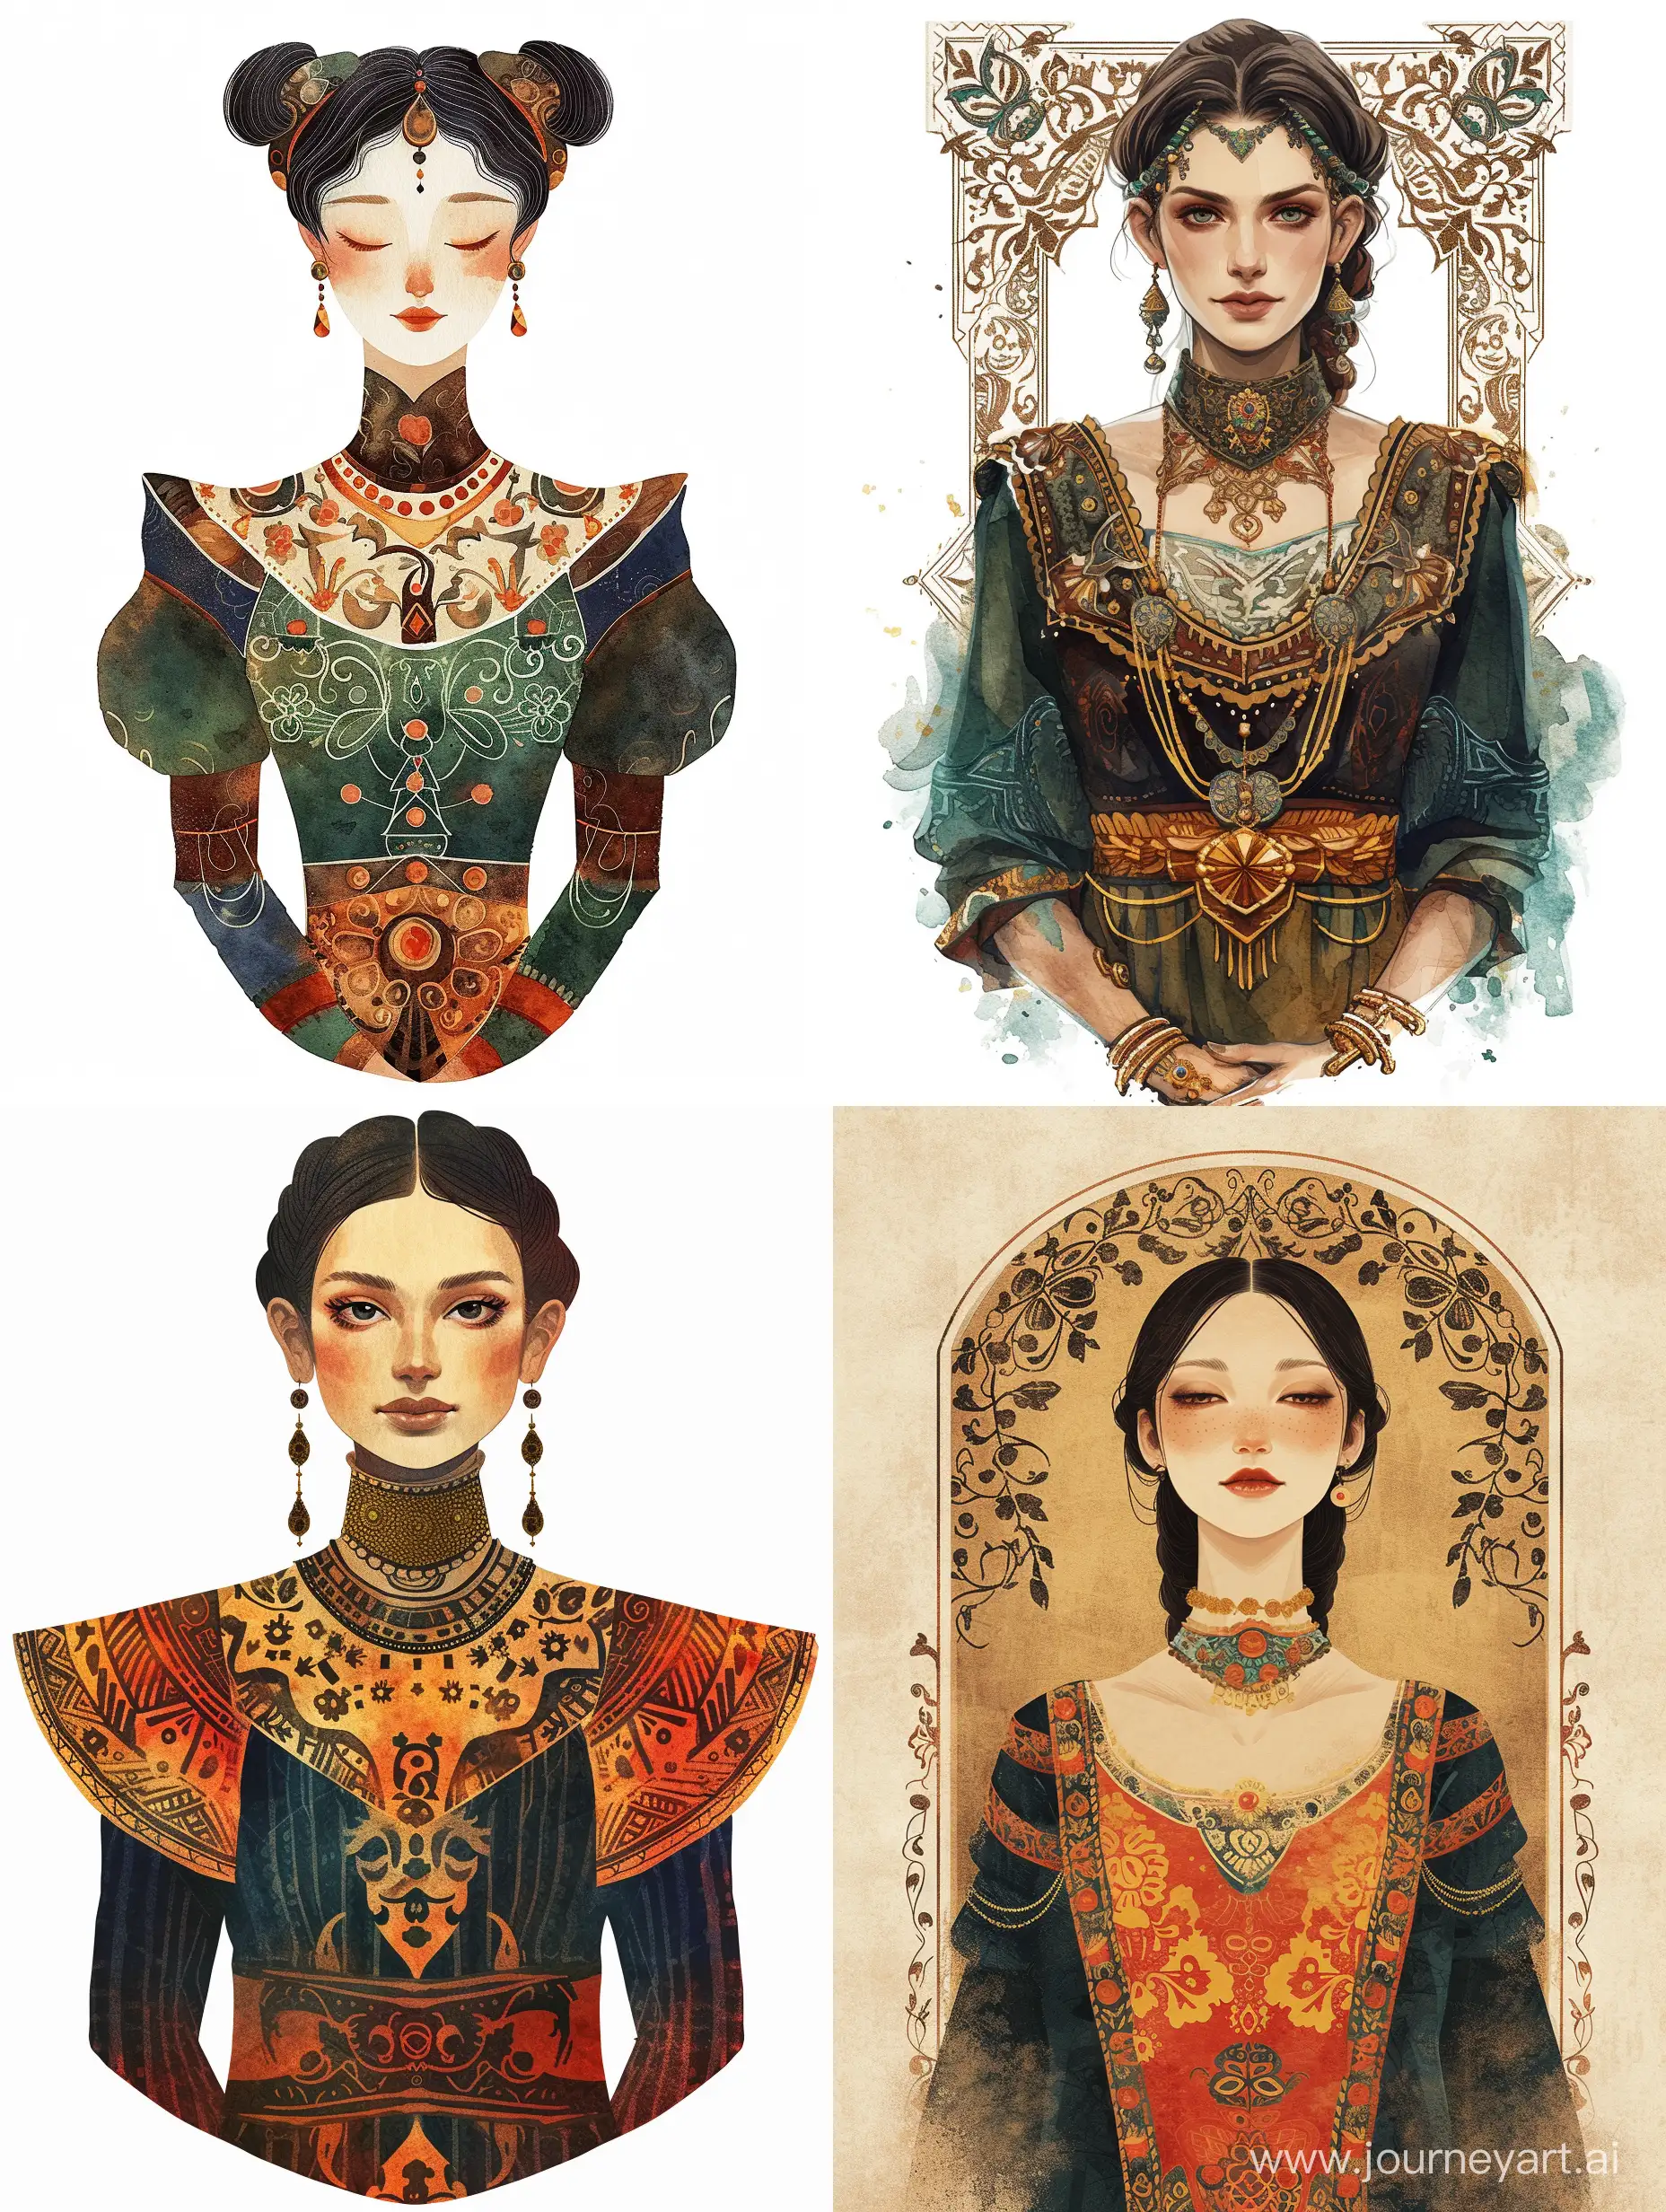 ornamental waist portrait of the ancient Queen of Bohemia, inreach clothes, with neck ornaments, watercolor style, detailed, decorative, flat illustration, Victor Ngai style